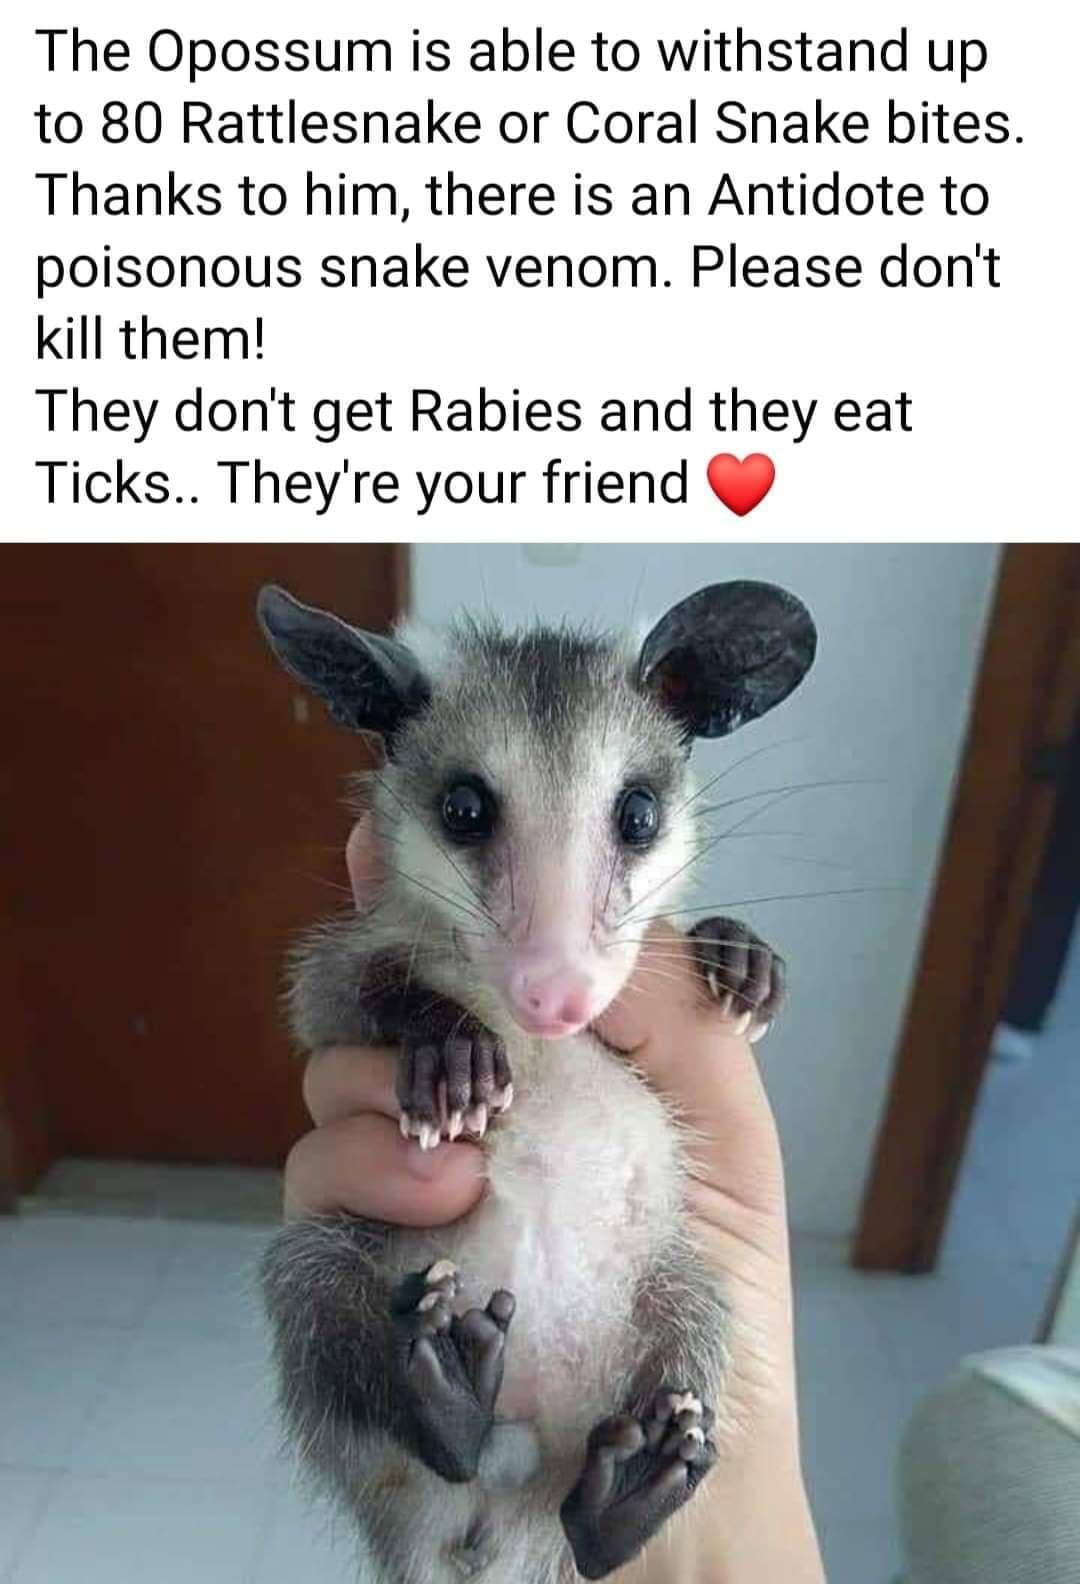 possum bite - The Opossum is able to withstand up to 80 Rattlesnake or Coral Snake bites. Thanks to him, there is an Antidote to poisonous snake venom. Please don't kill them! They don't get Rabies and they eat Ticks.. They're your friend